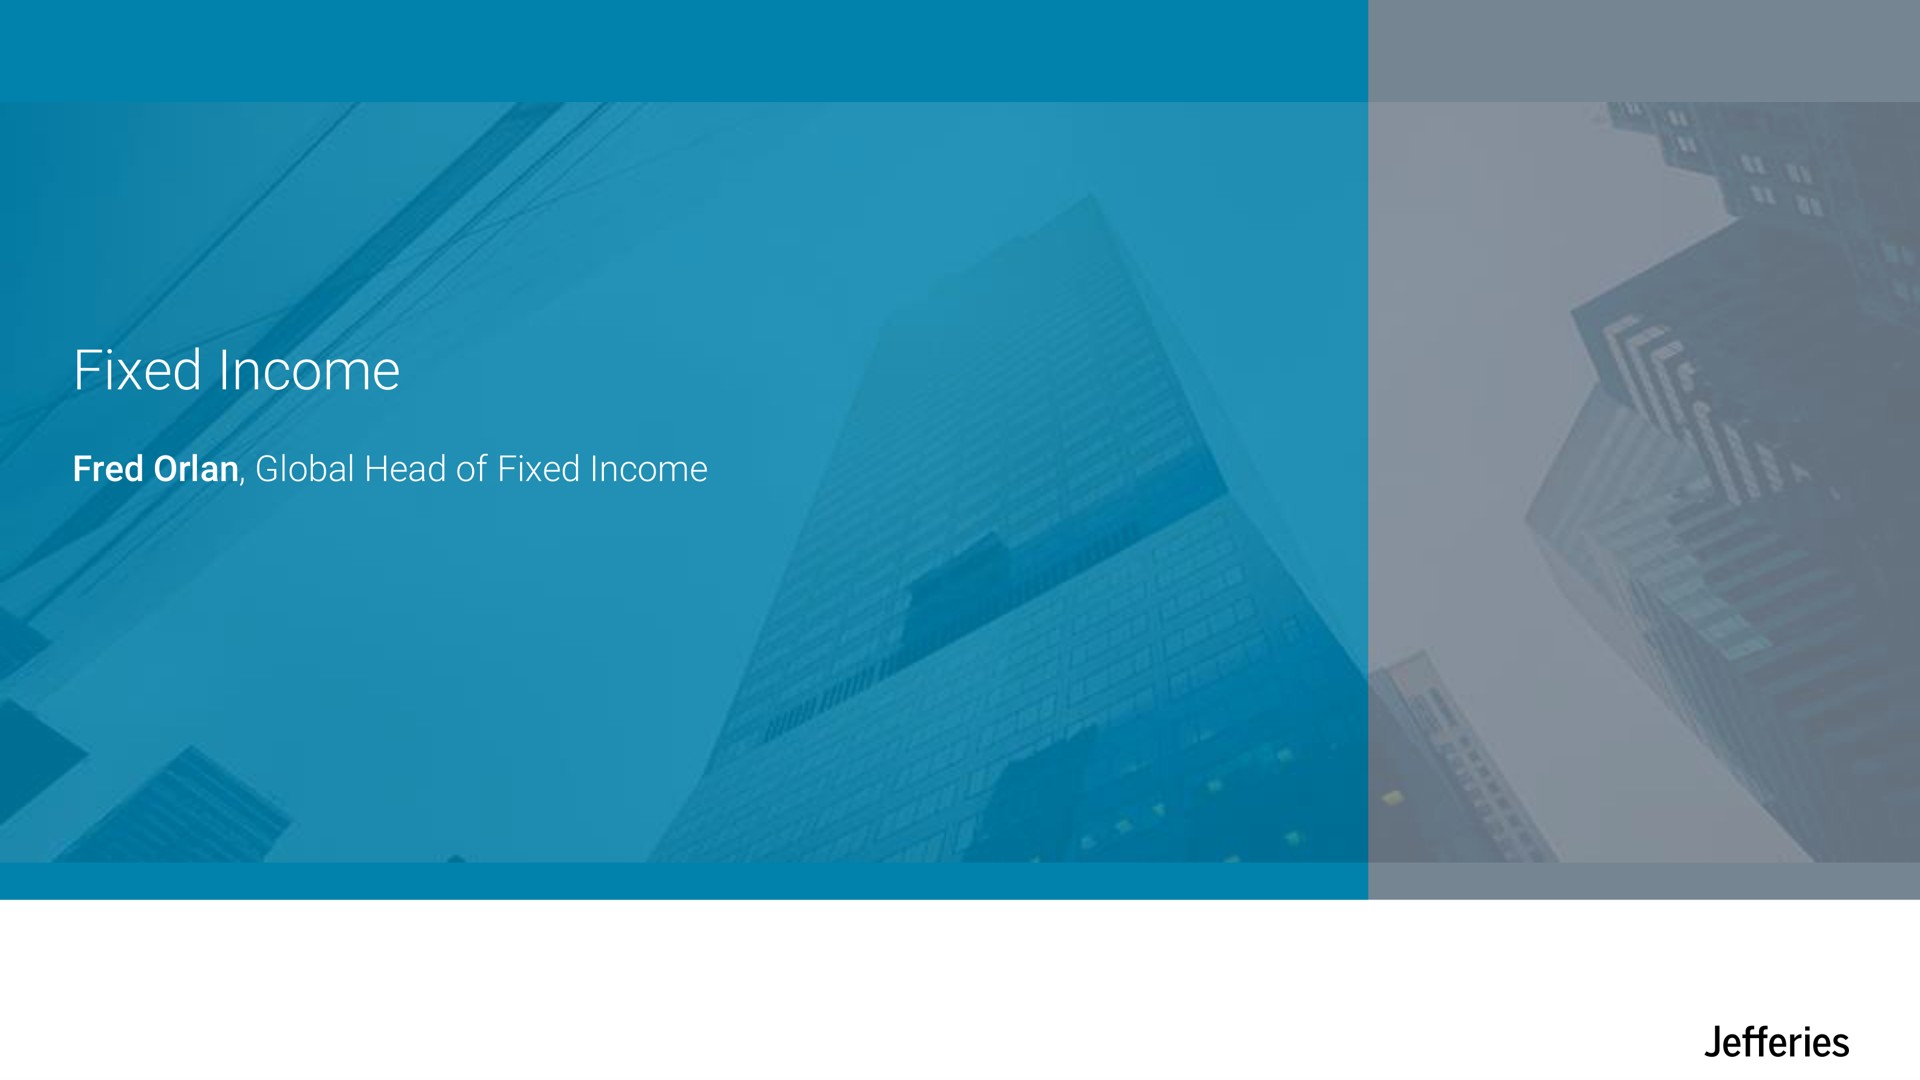 fixed income | Jefferies Financial Group